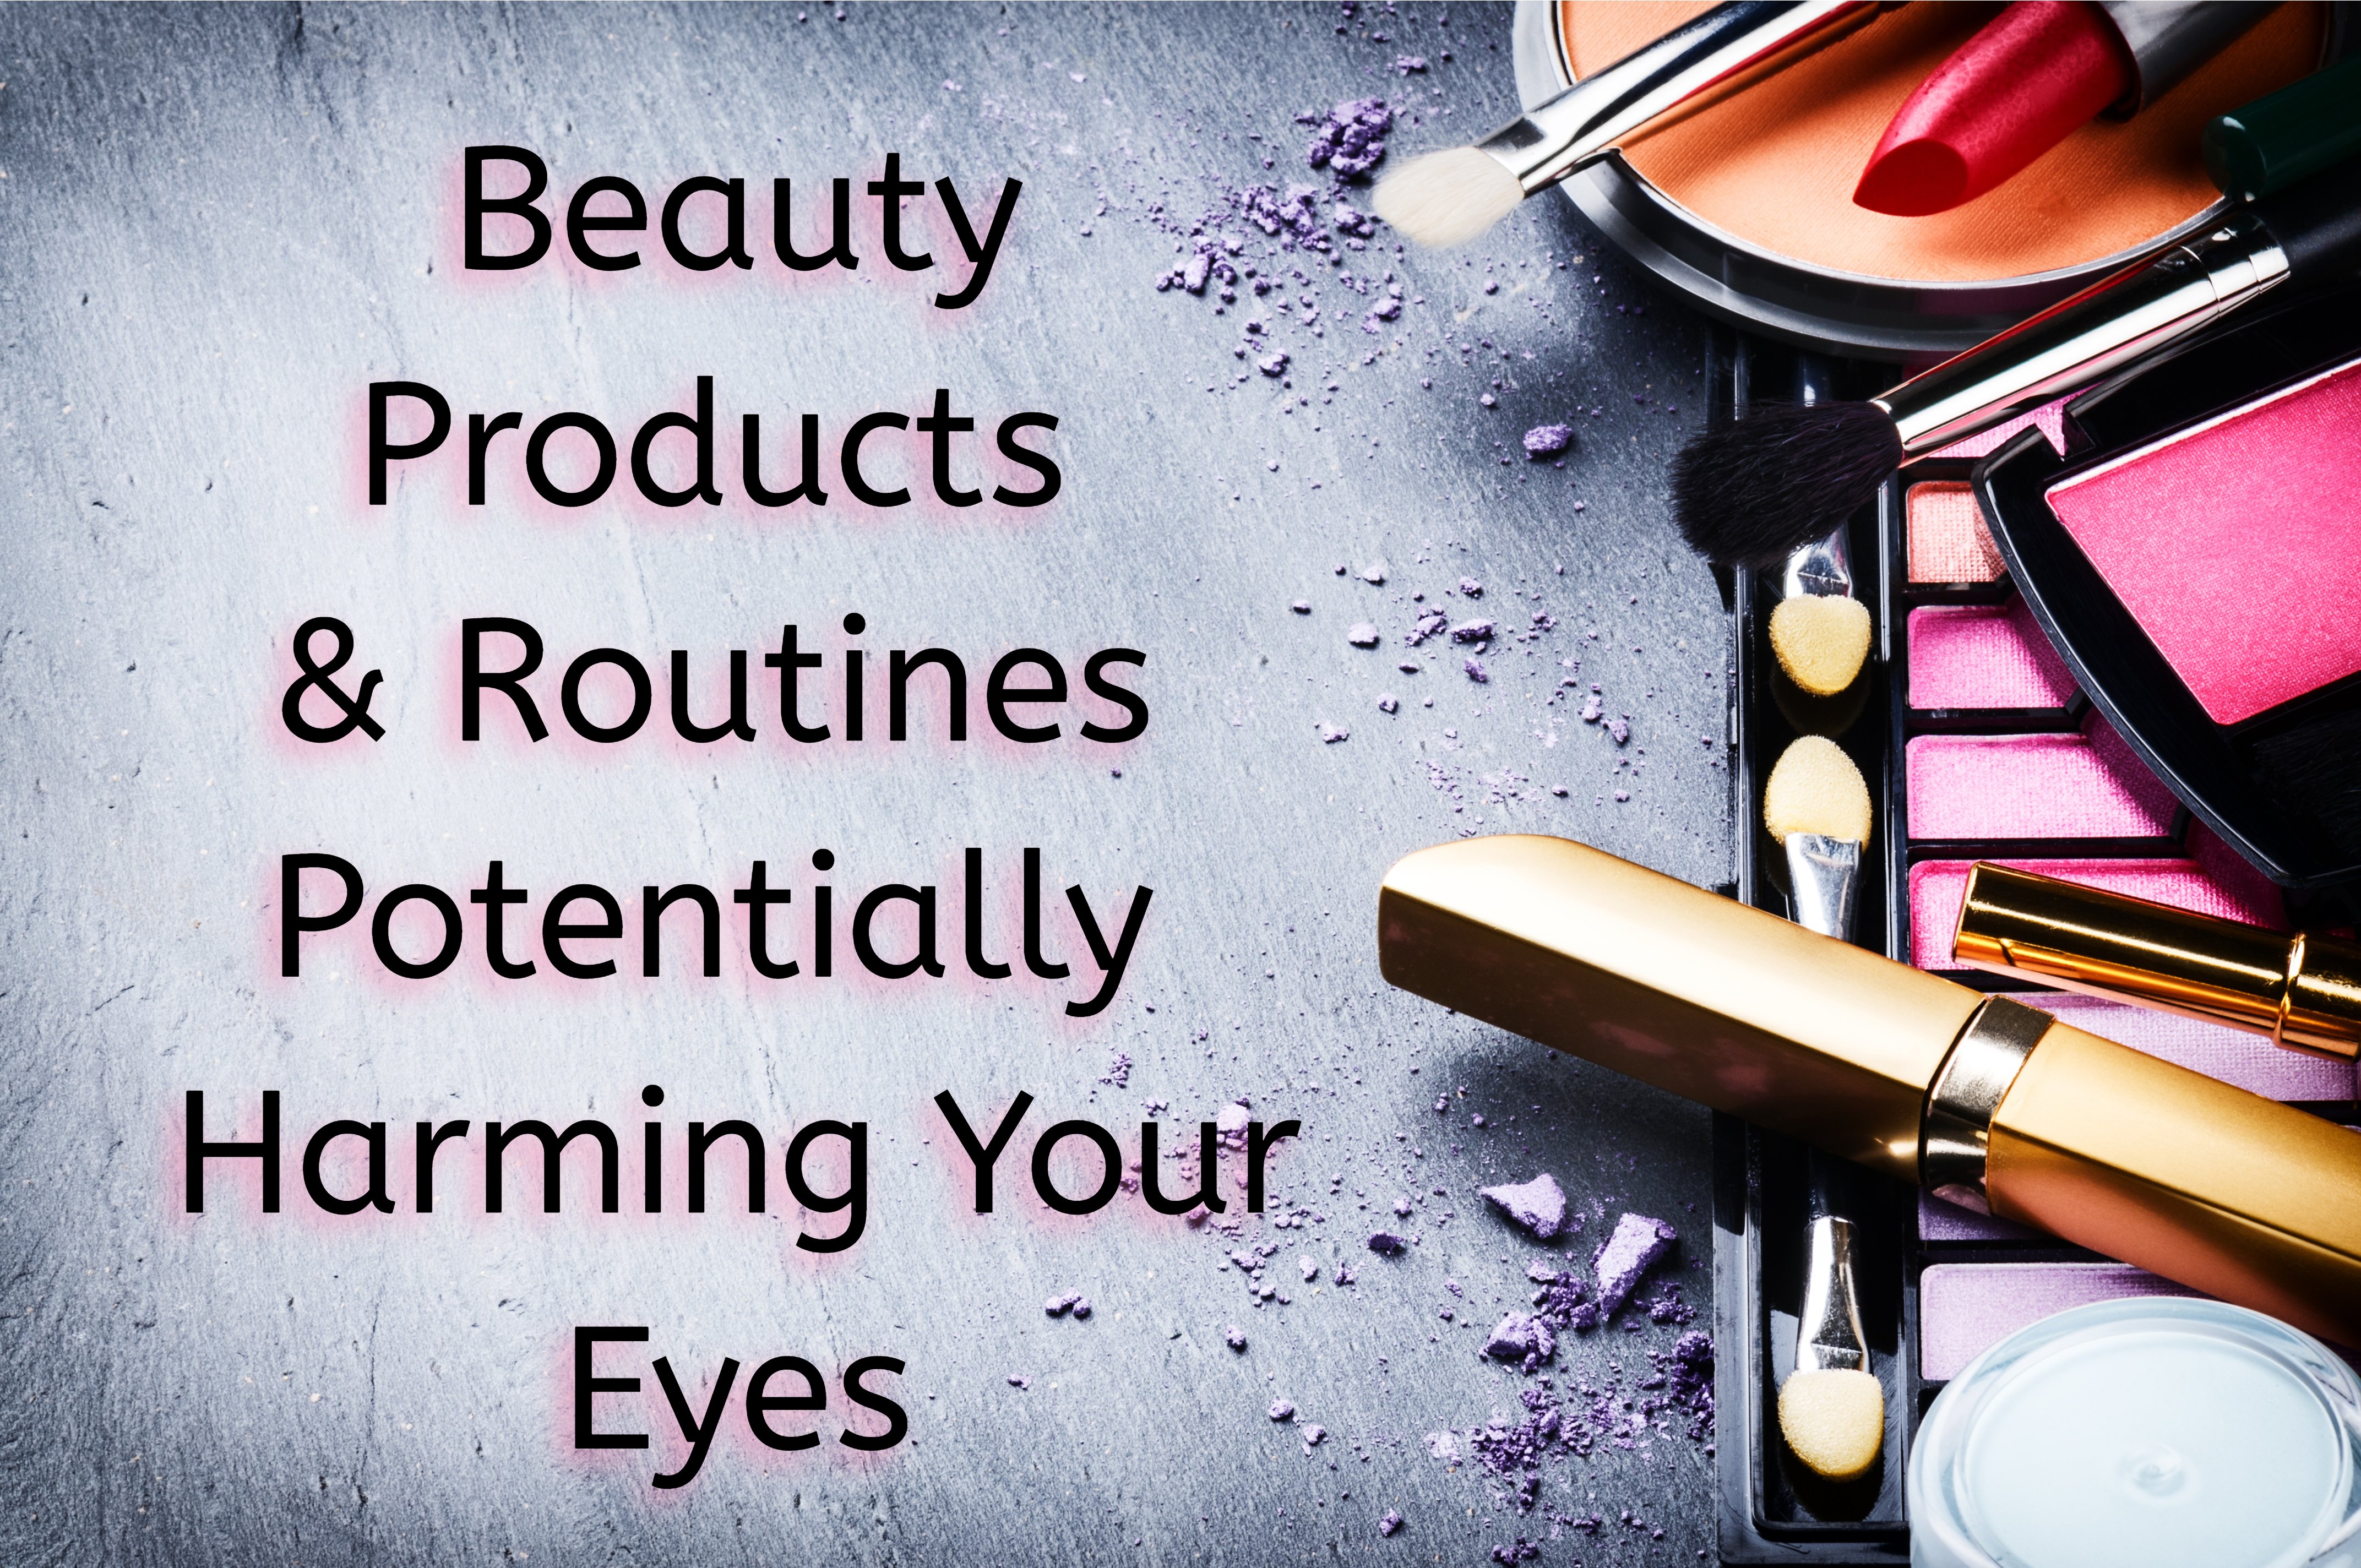 Beauty Products & Routines Potentially Harming Your Eyes